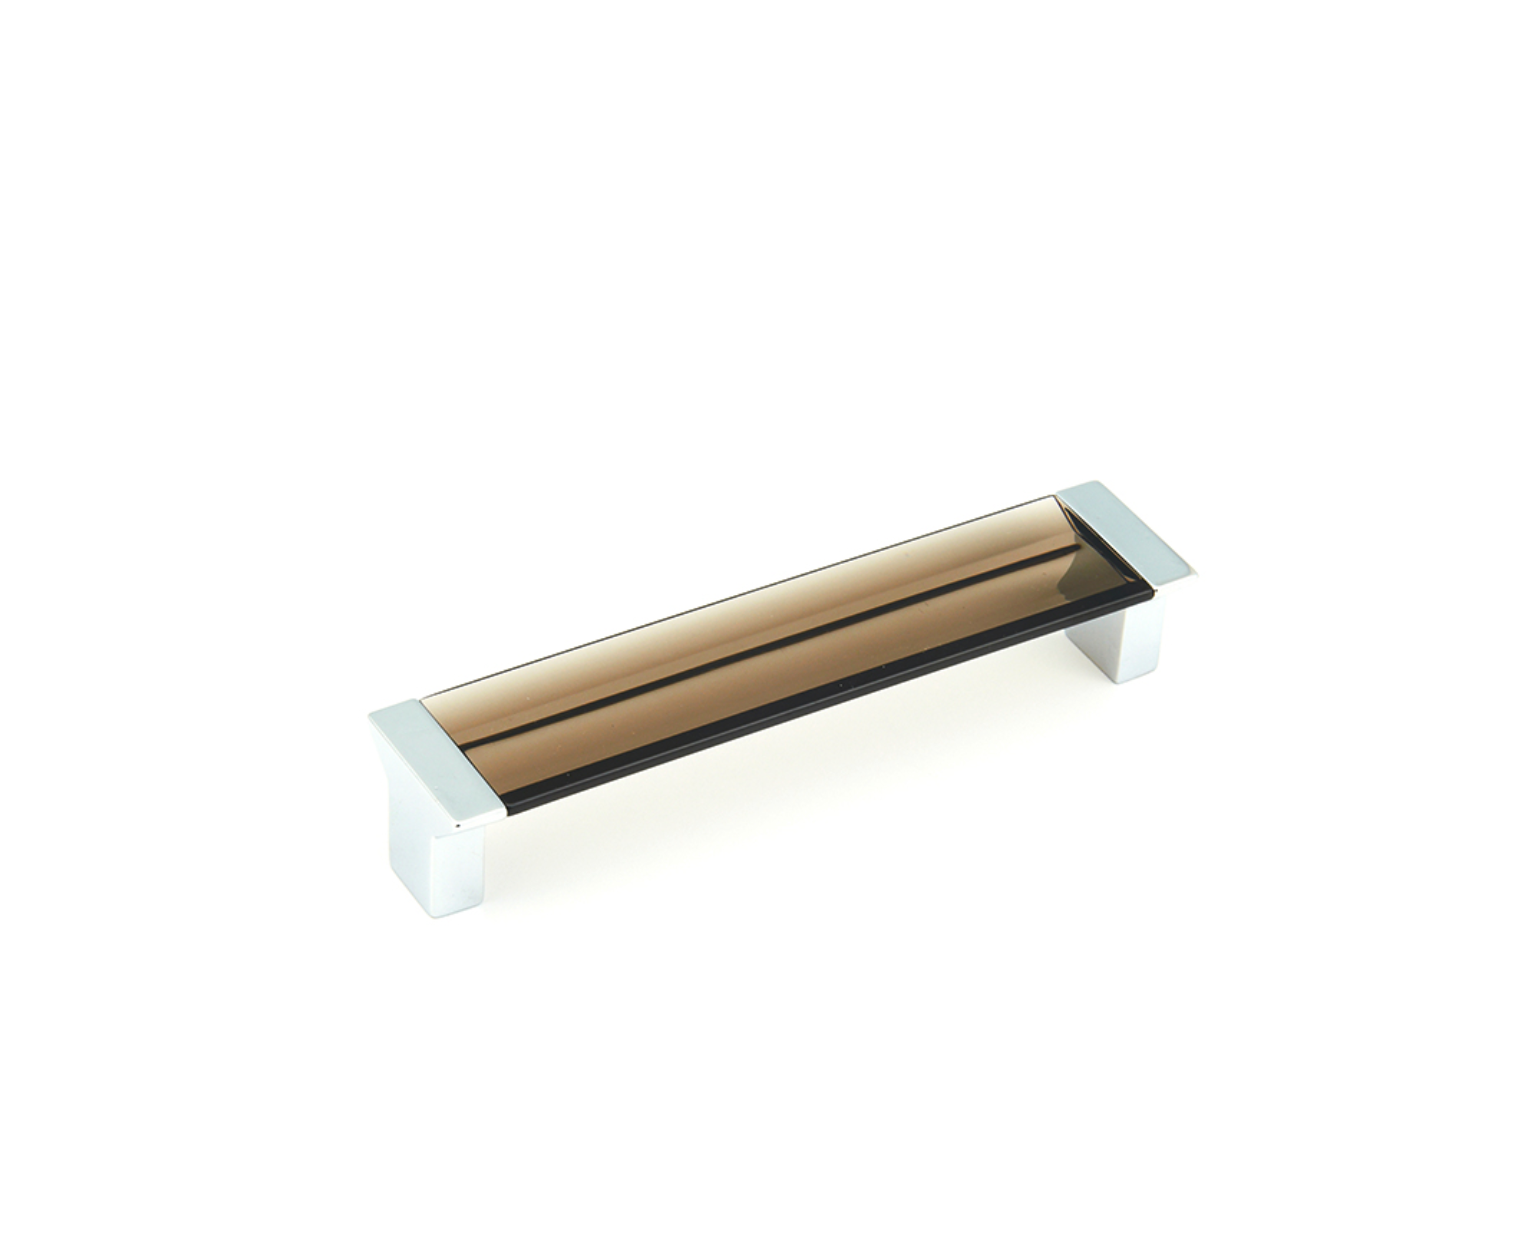 Satin Nickel "Ponce" Smoked Glass Cabinet Knob and Drawer Pulls - Industry Hardware